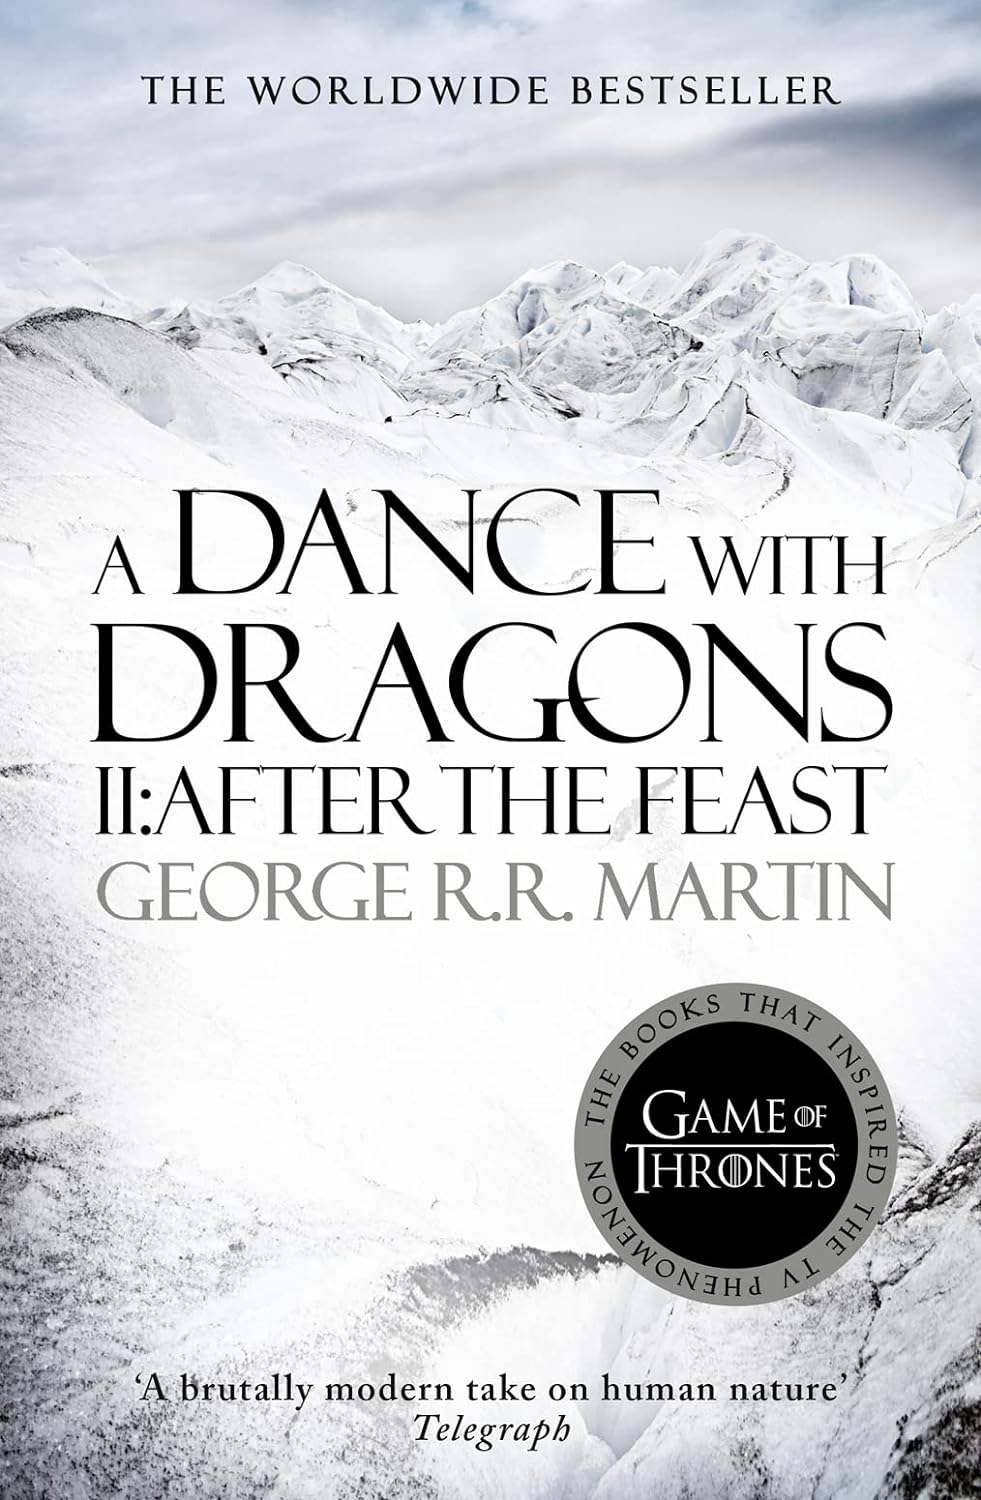 A Dance with Dragons 2: After the Feast by George R.R. Martin